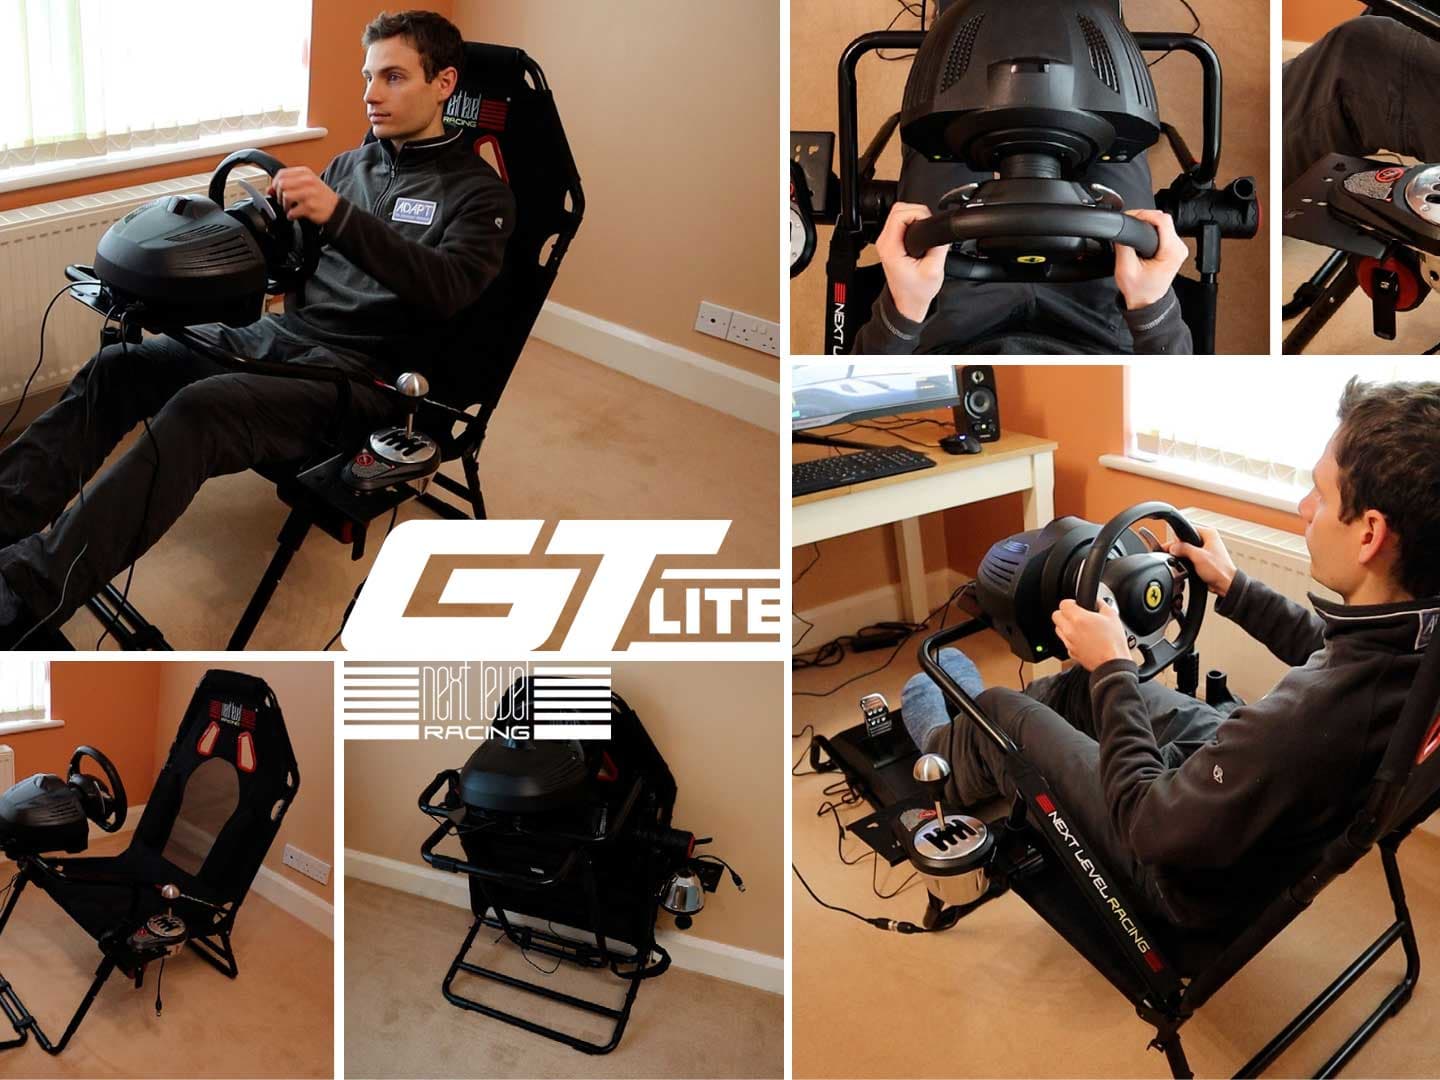 Cover solutions for a Playseat Challenge when folded? : r/simracing